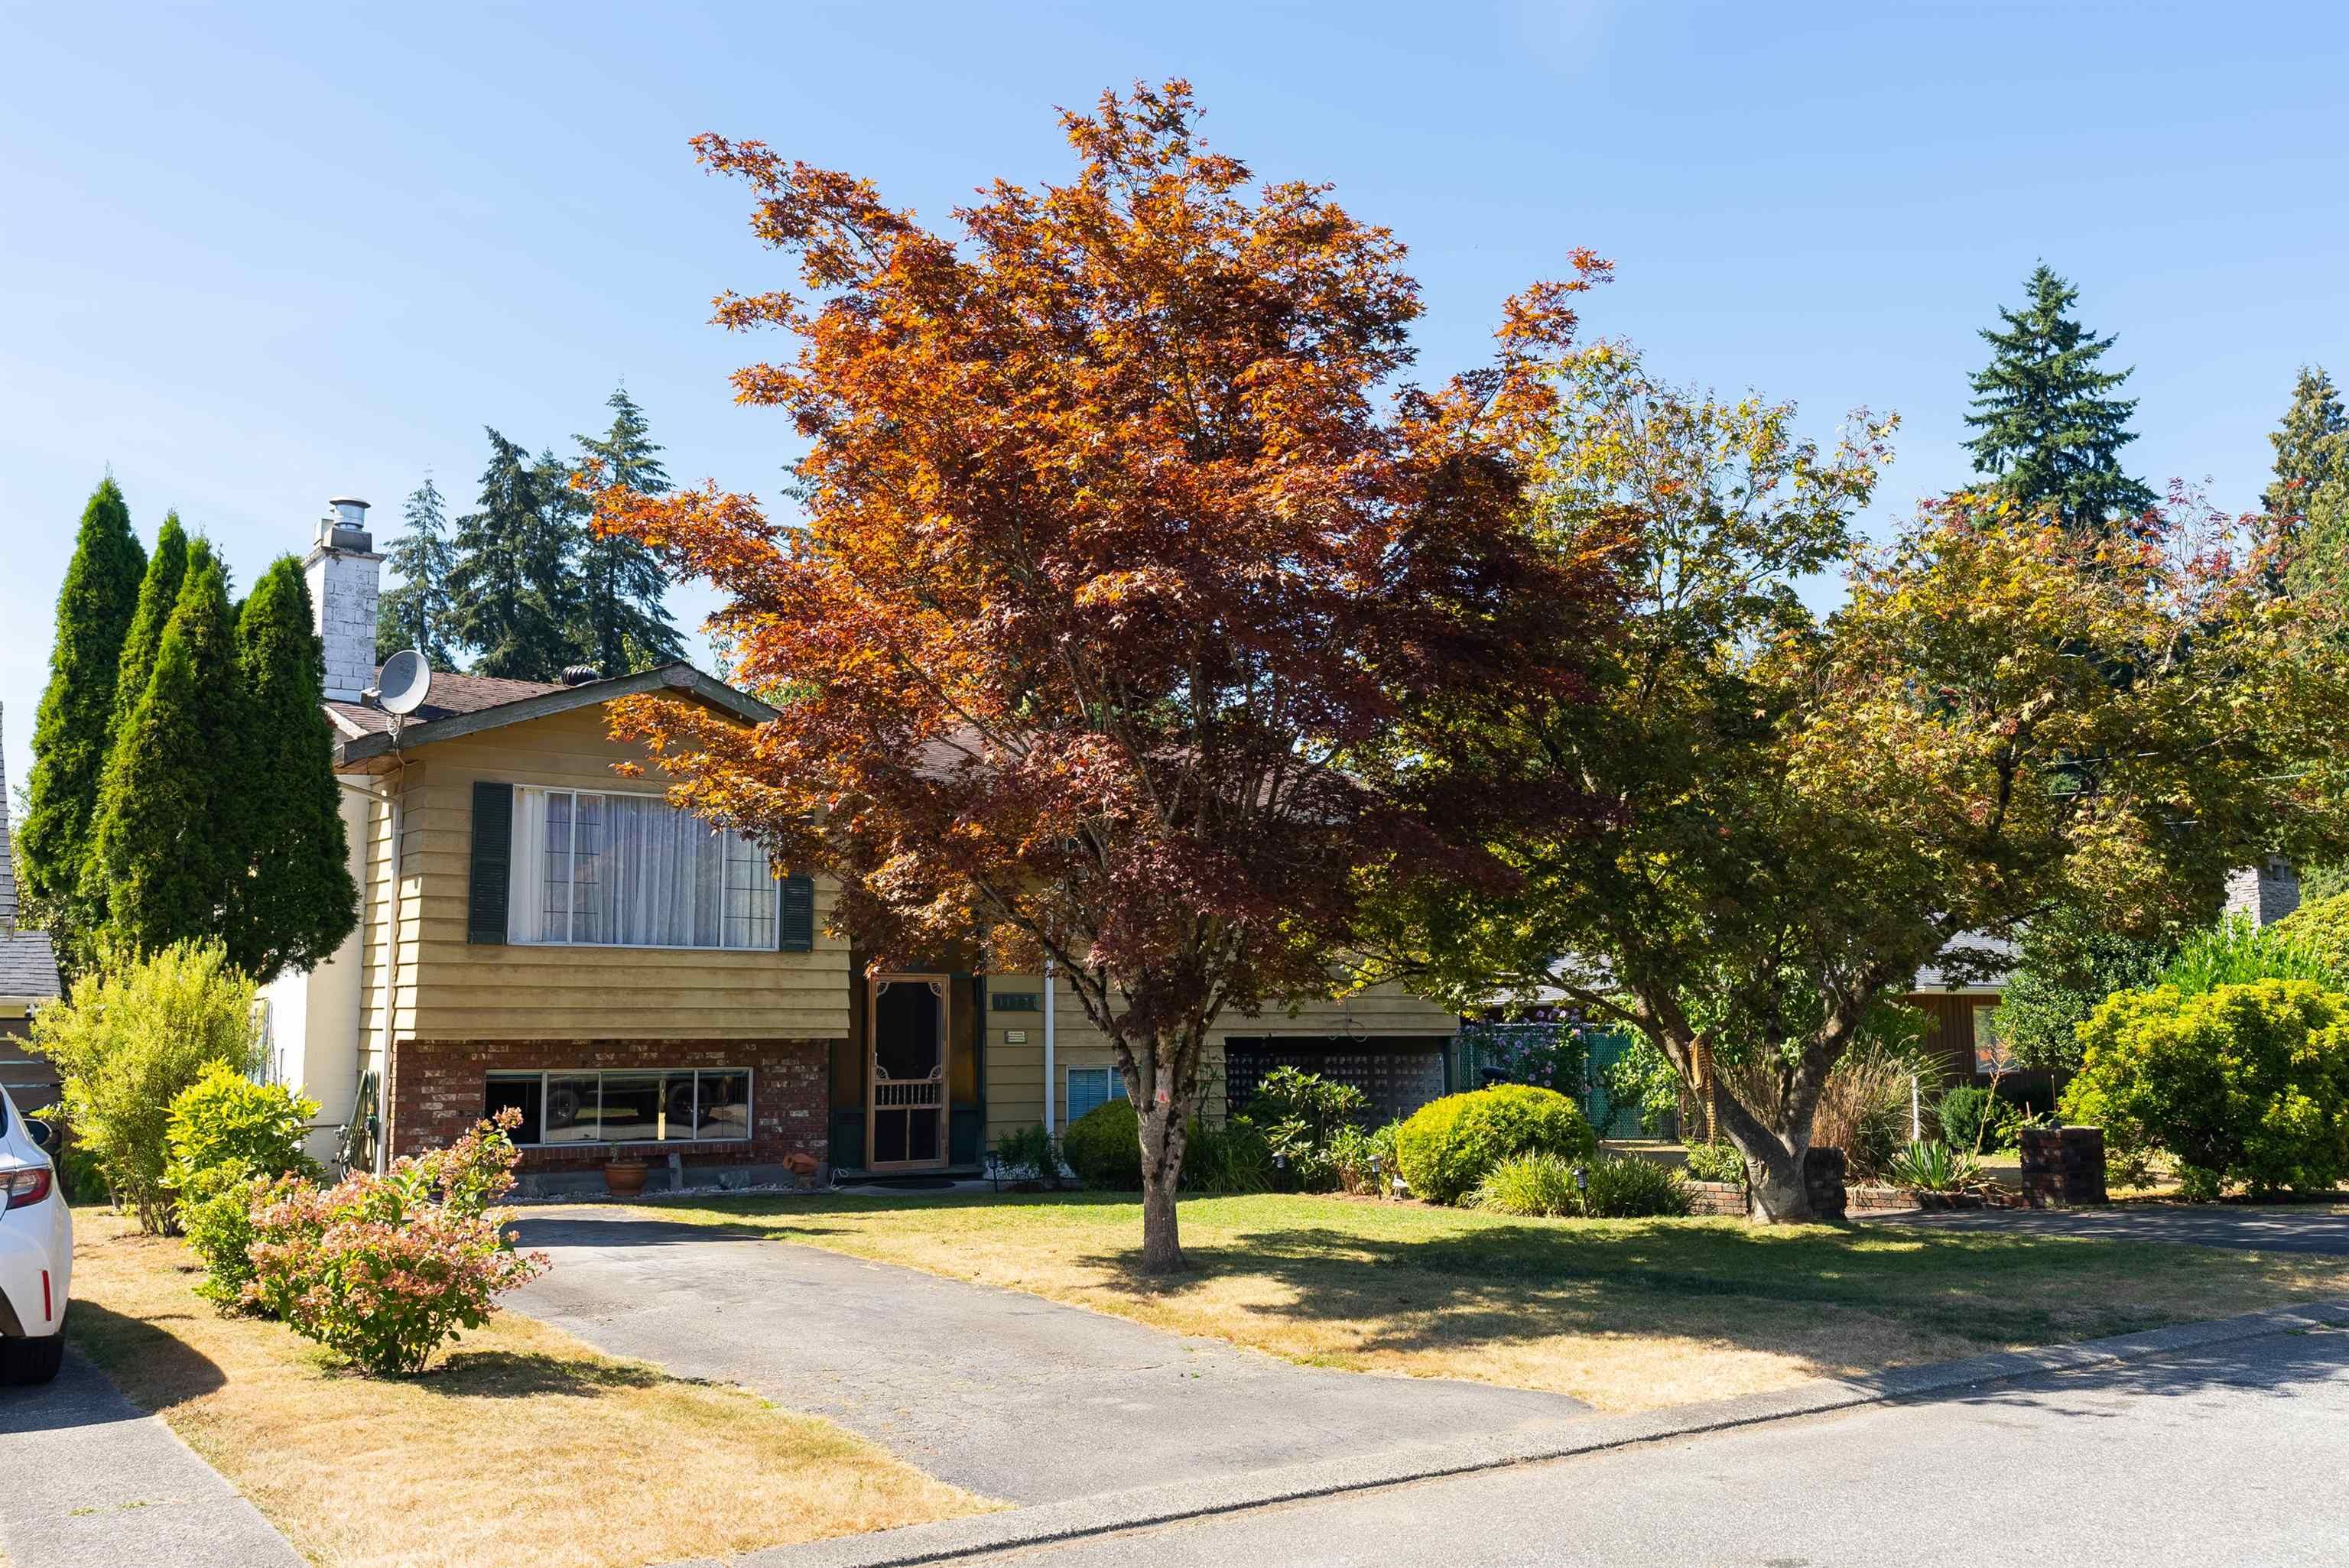 This property has sold: 11731 194B ST in Pitt Meadows